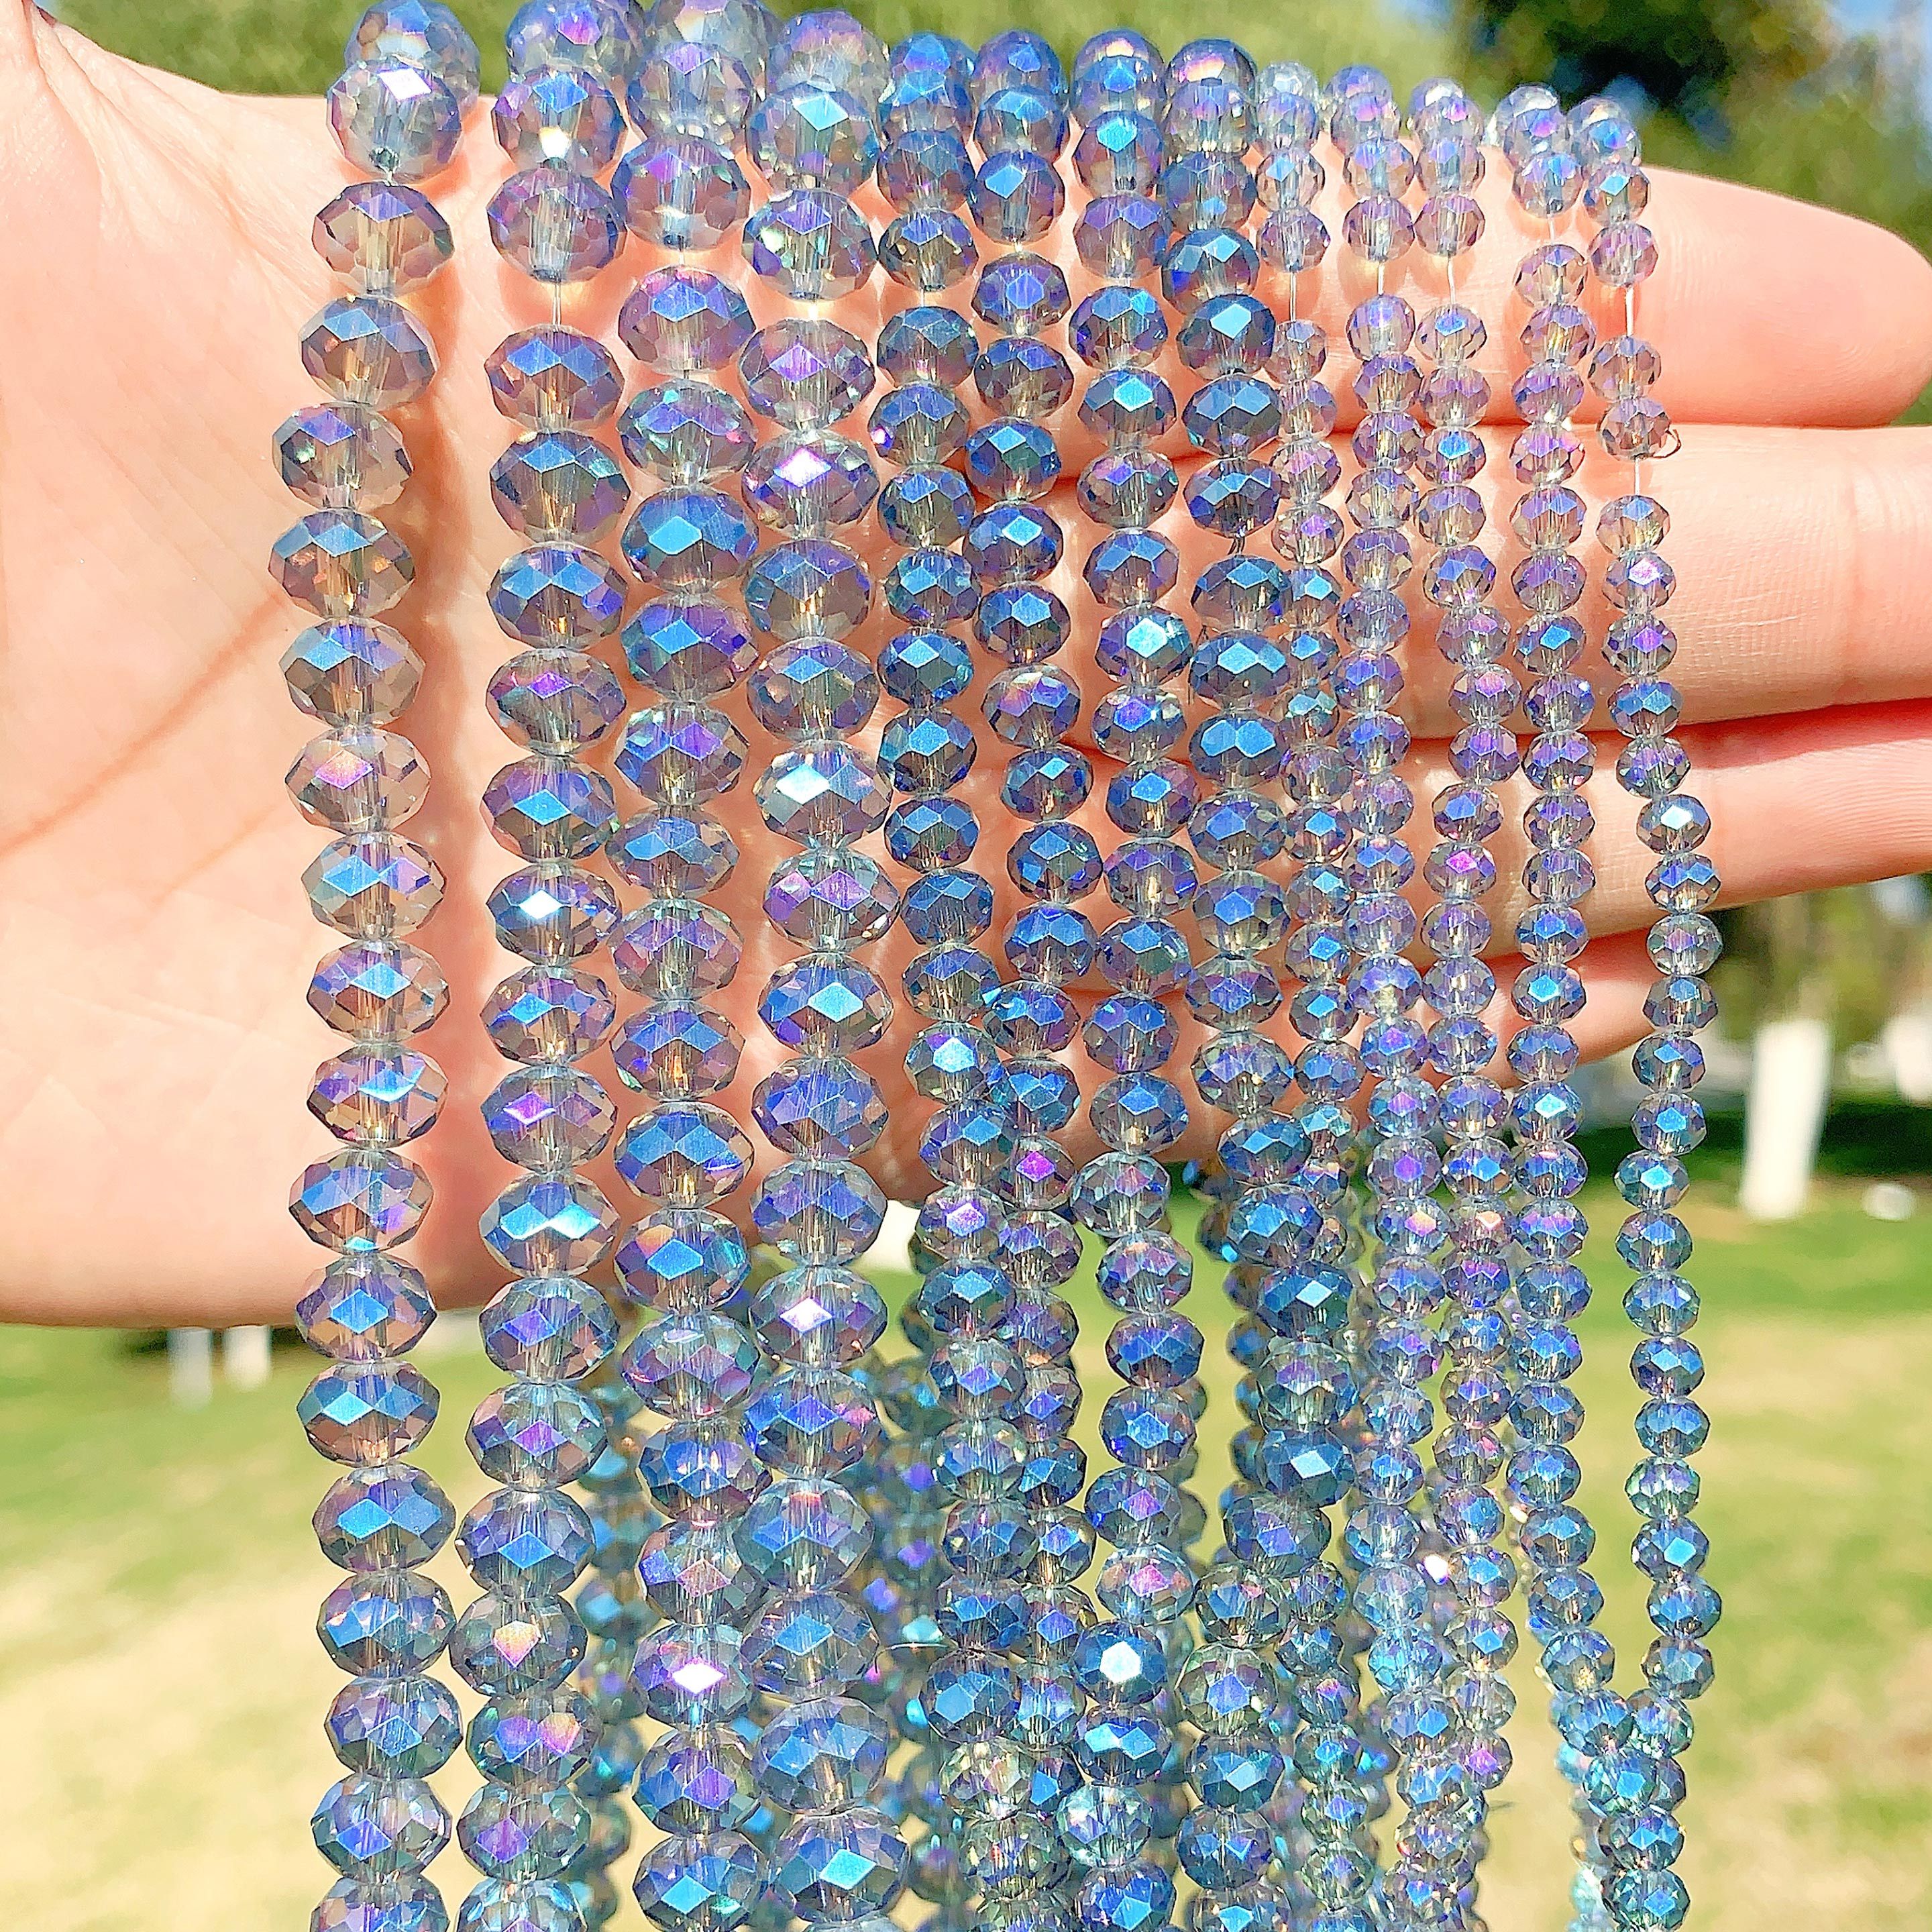 6mm Glass Beads, Clear Blue Water Beads, Jewelry Making Beads,faceted  Beads, Rondelle Shaped Beads, Blue Beads, Bracelet Beads 